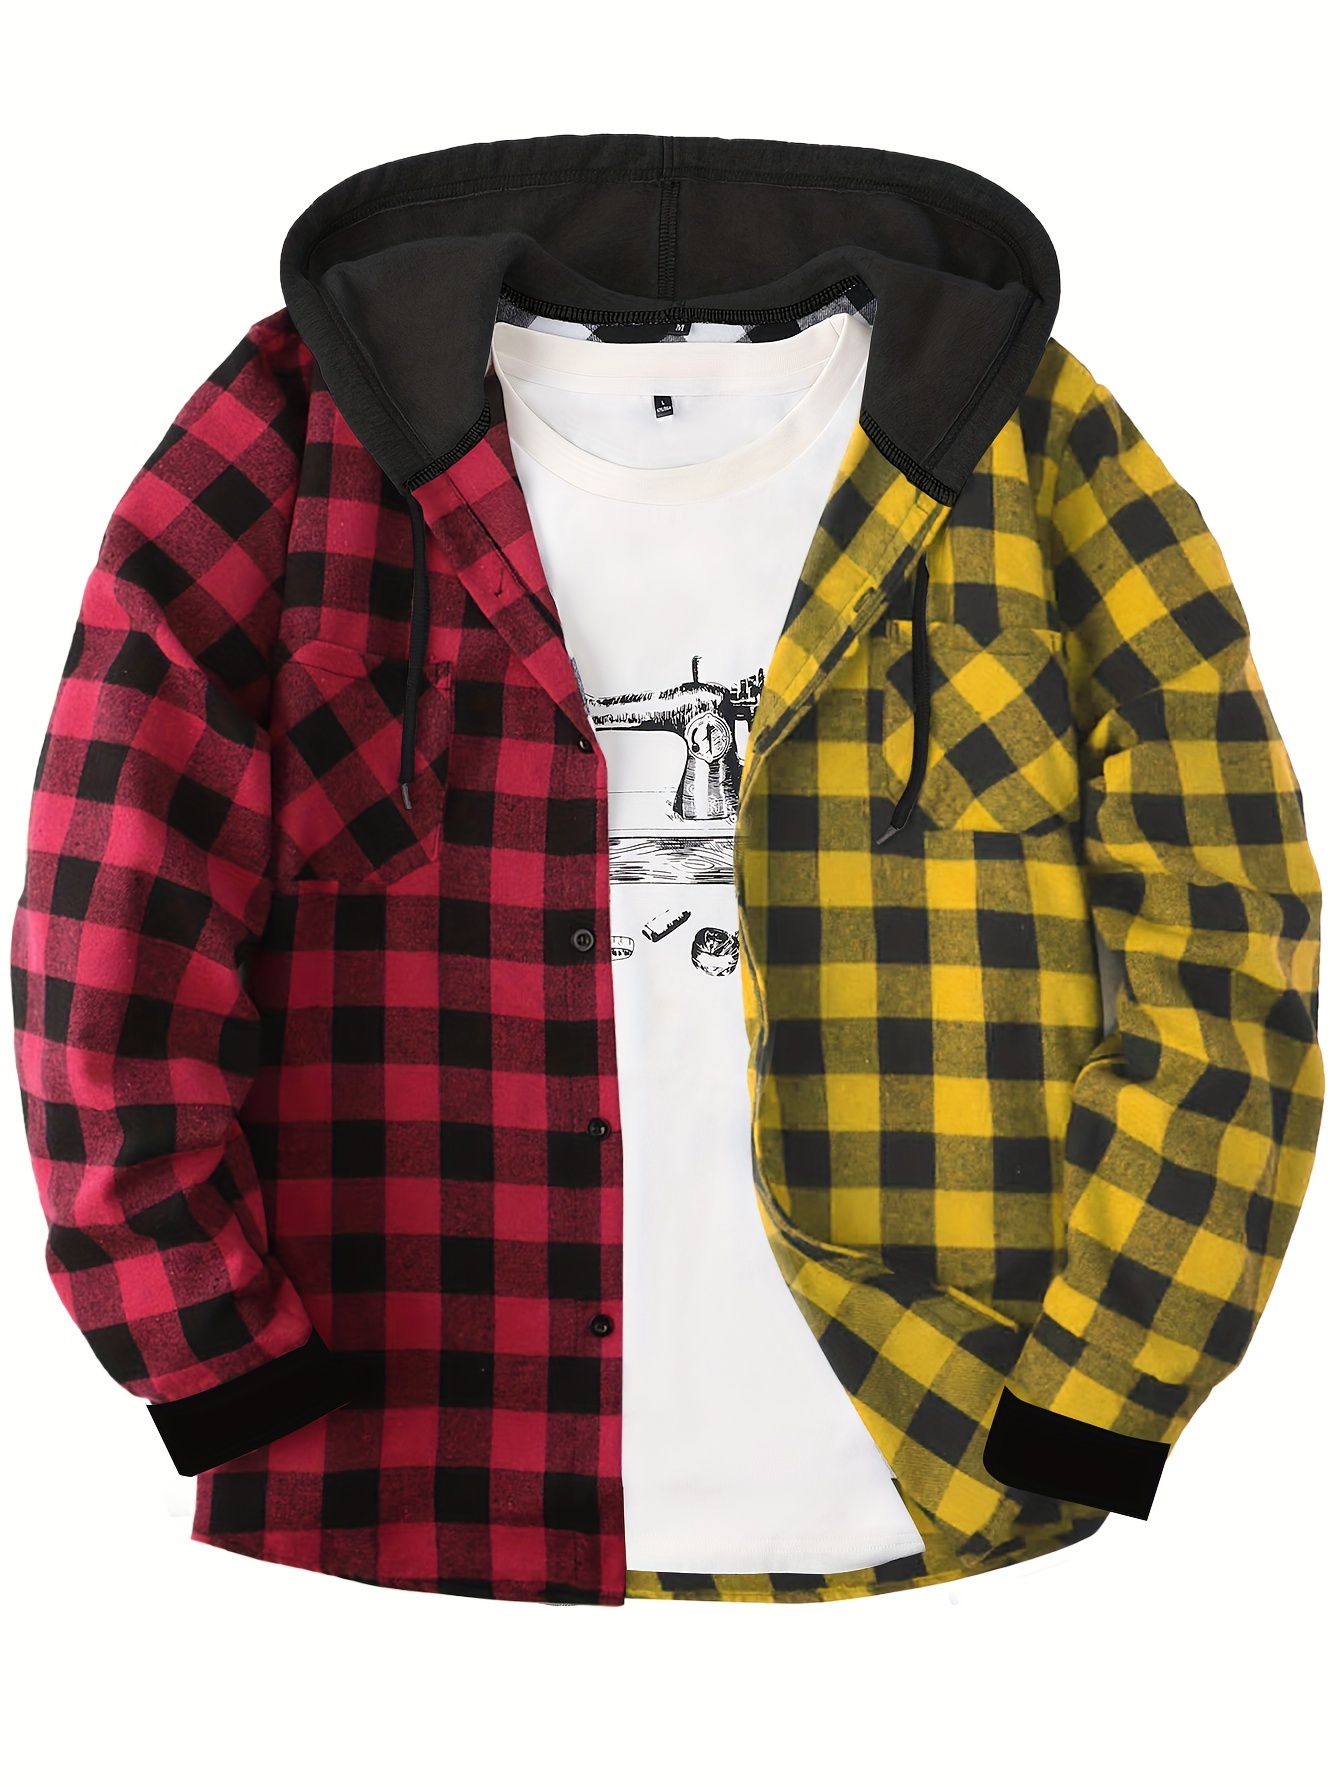 long sleeve casual regular fit button up hooded shirts jacket plaid shirt coat for men details 5